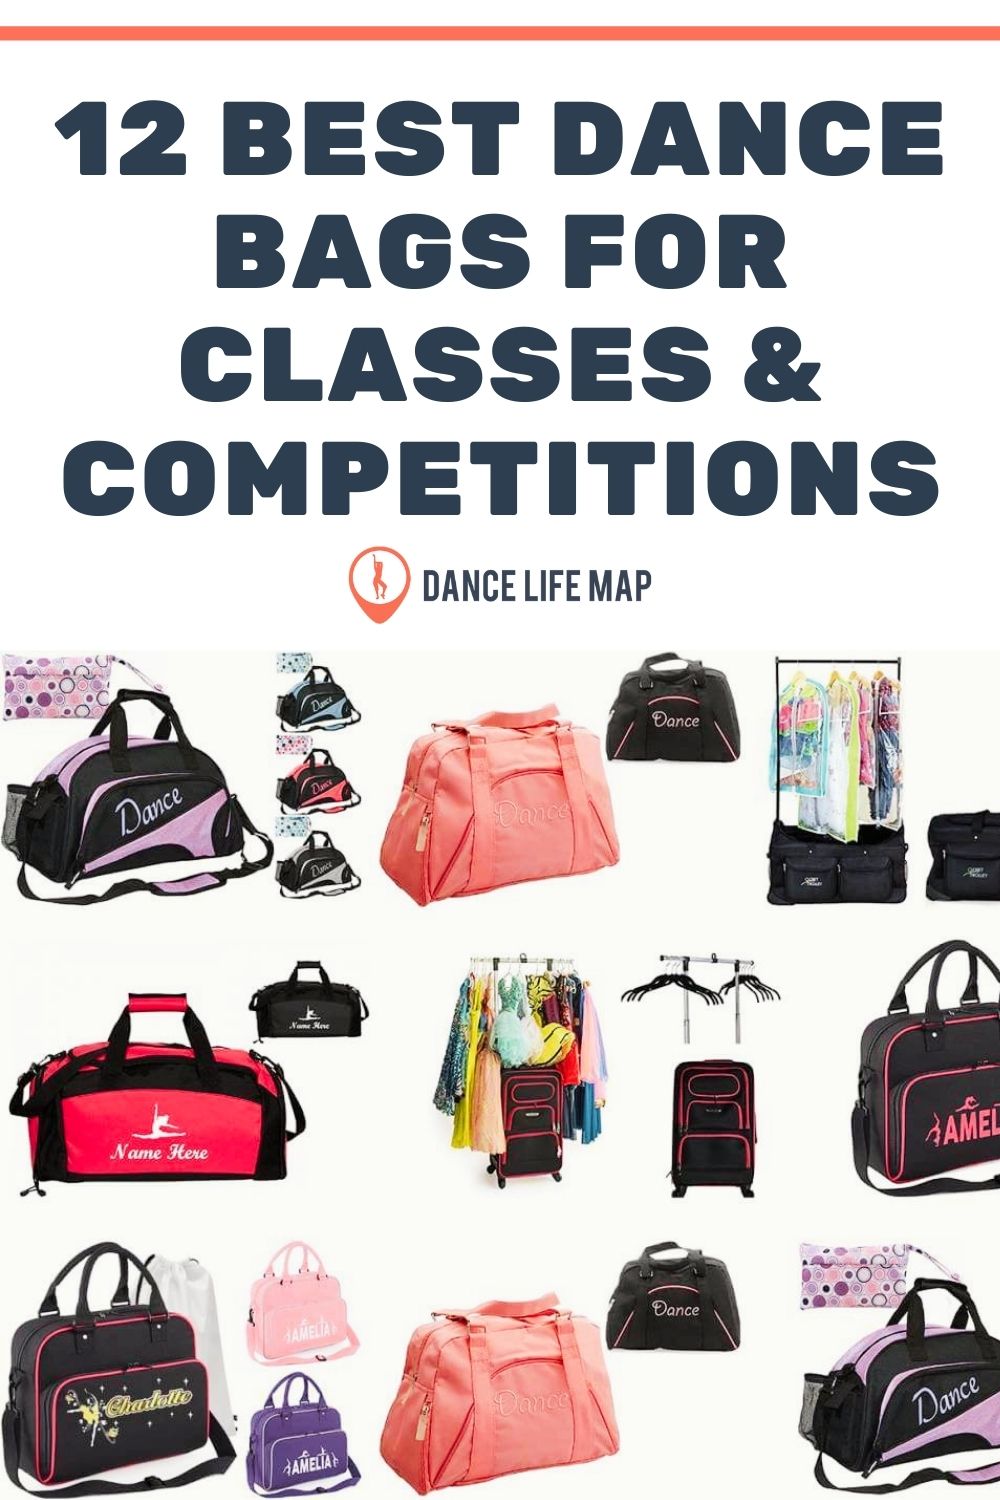 12 best dance bags for classes competitions pinterest